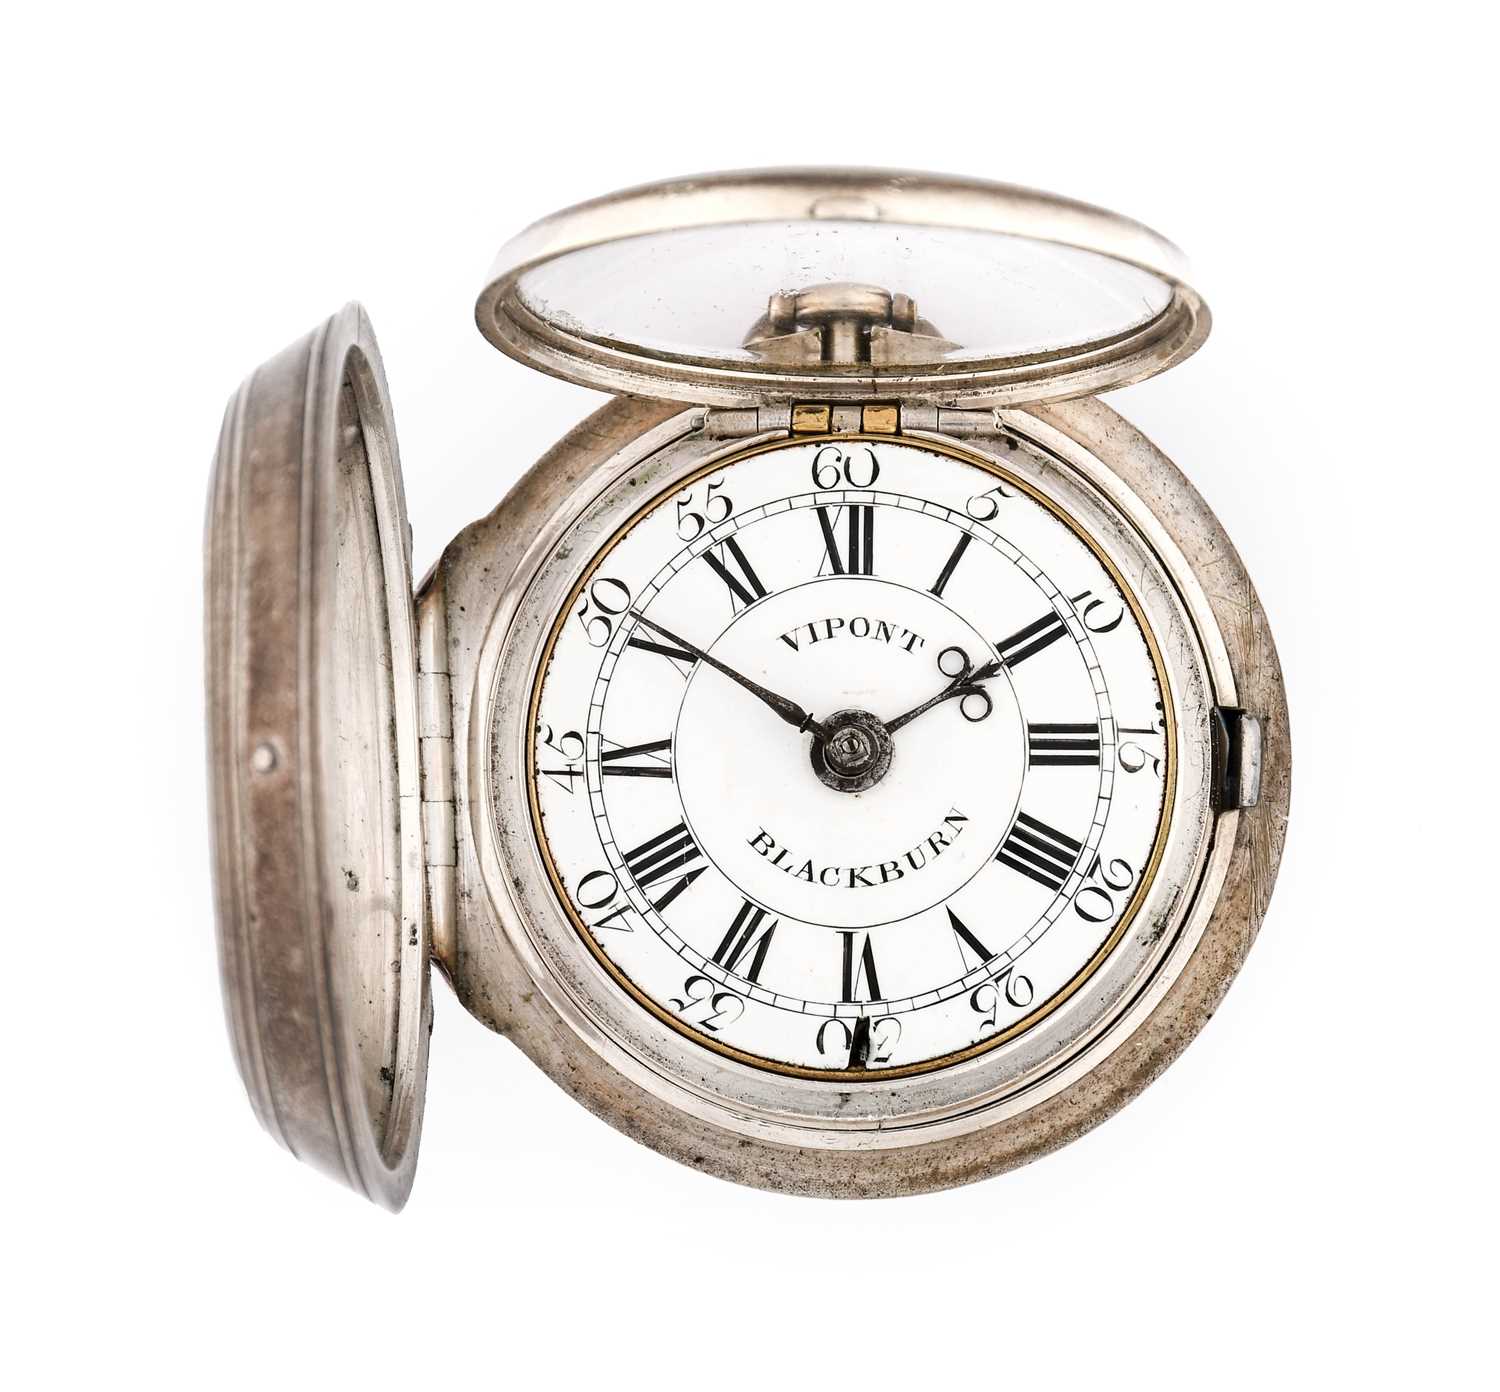 Vipont: A Silver Pair Cased Verge Pocket Watch, signed Vipont, Blackburn, 1763, single chain fusee - Image 2 of 3